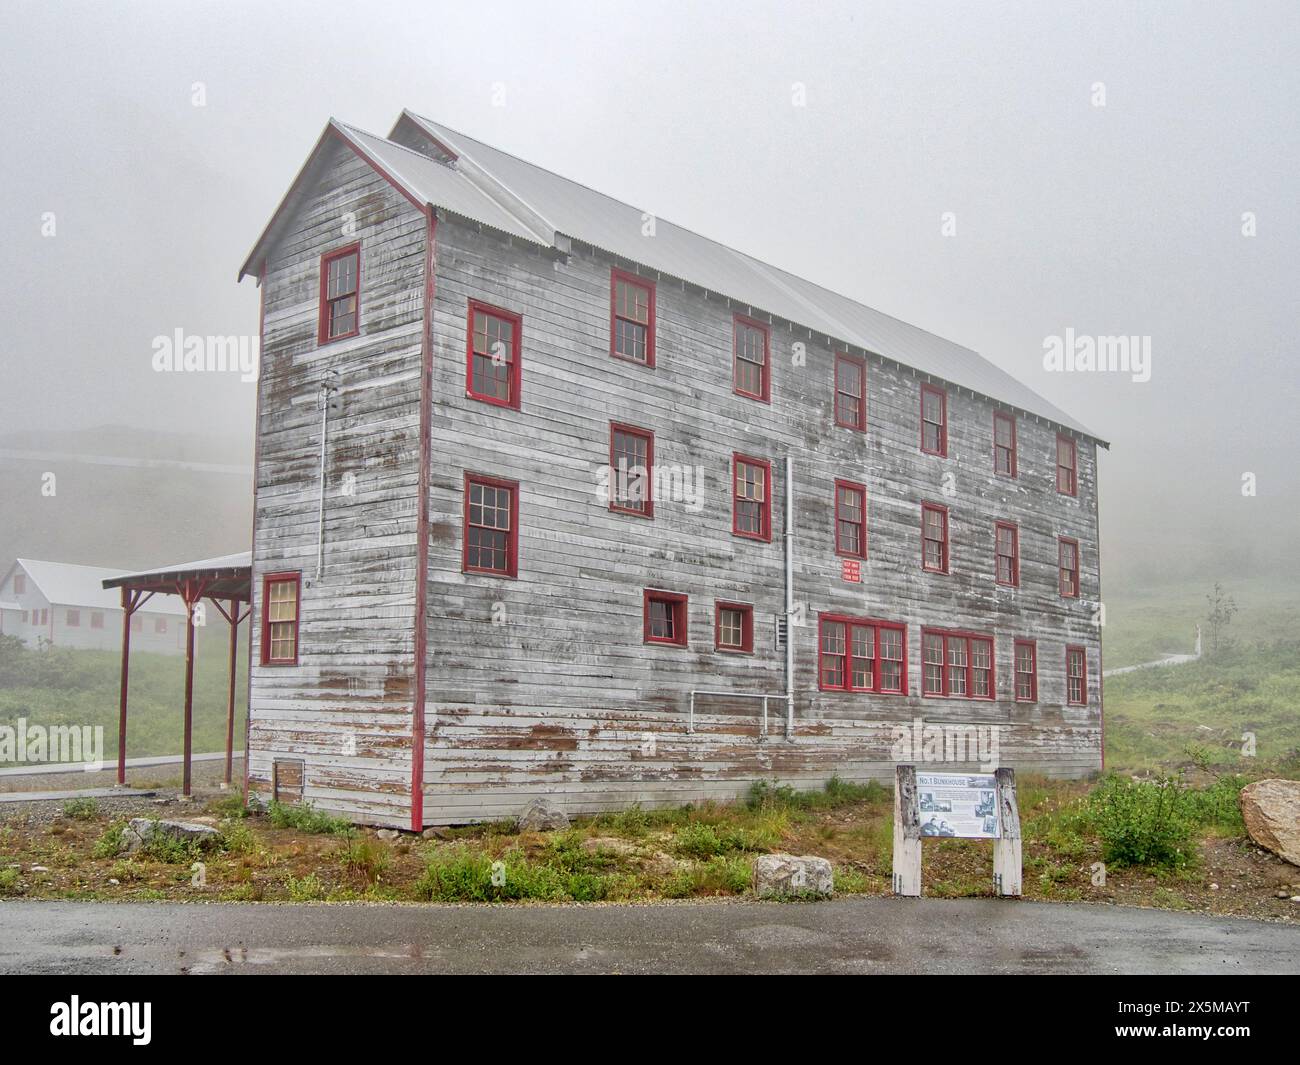 USA, Alaska. No. 1 bunkhouse at the Independence Mine State Historical Park listed on the National Register of Historic Places, a former gold mining o Stock Photo